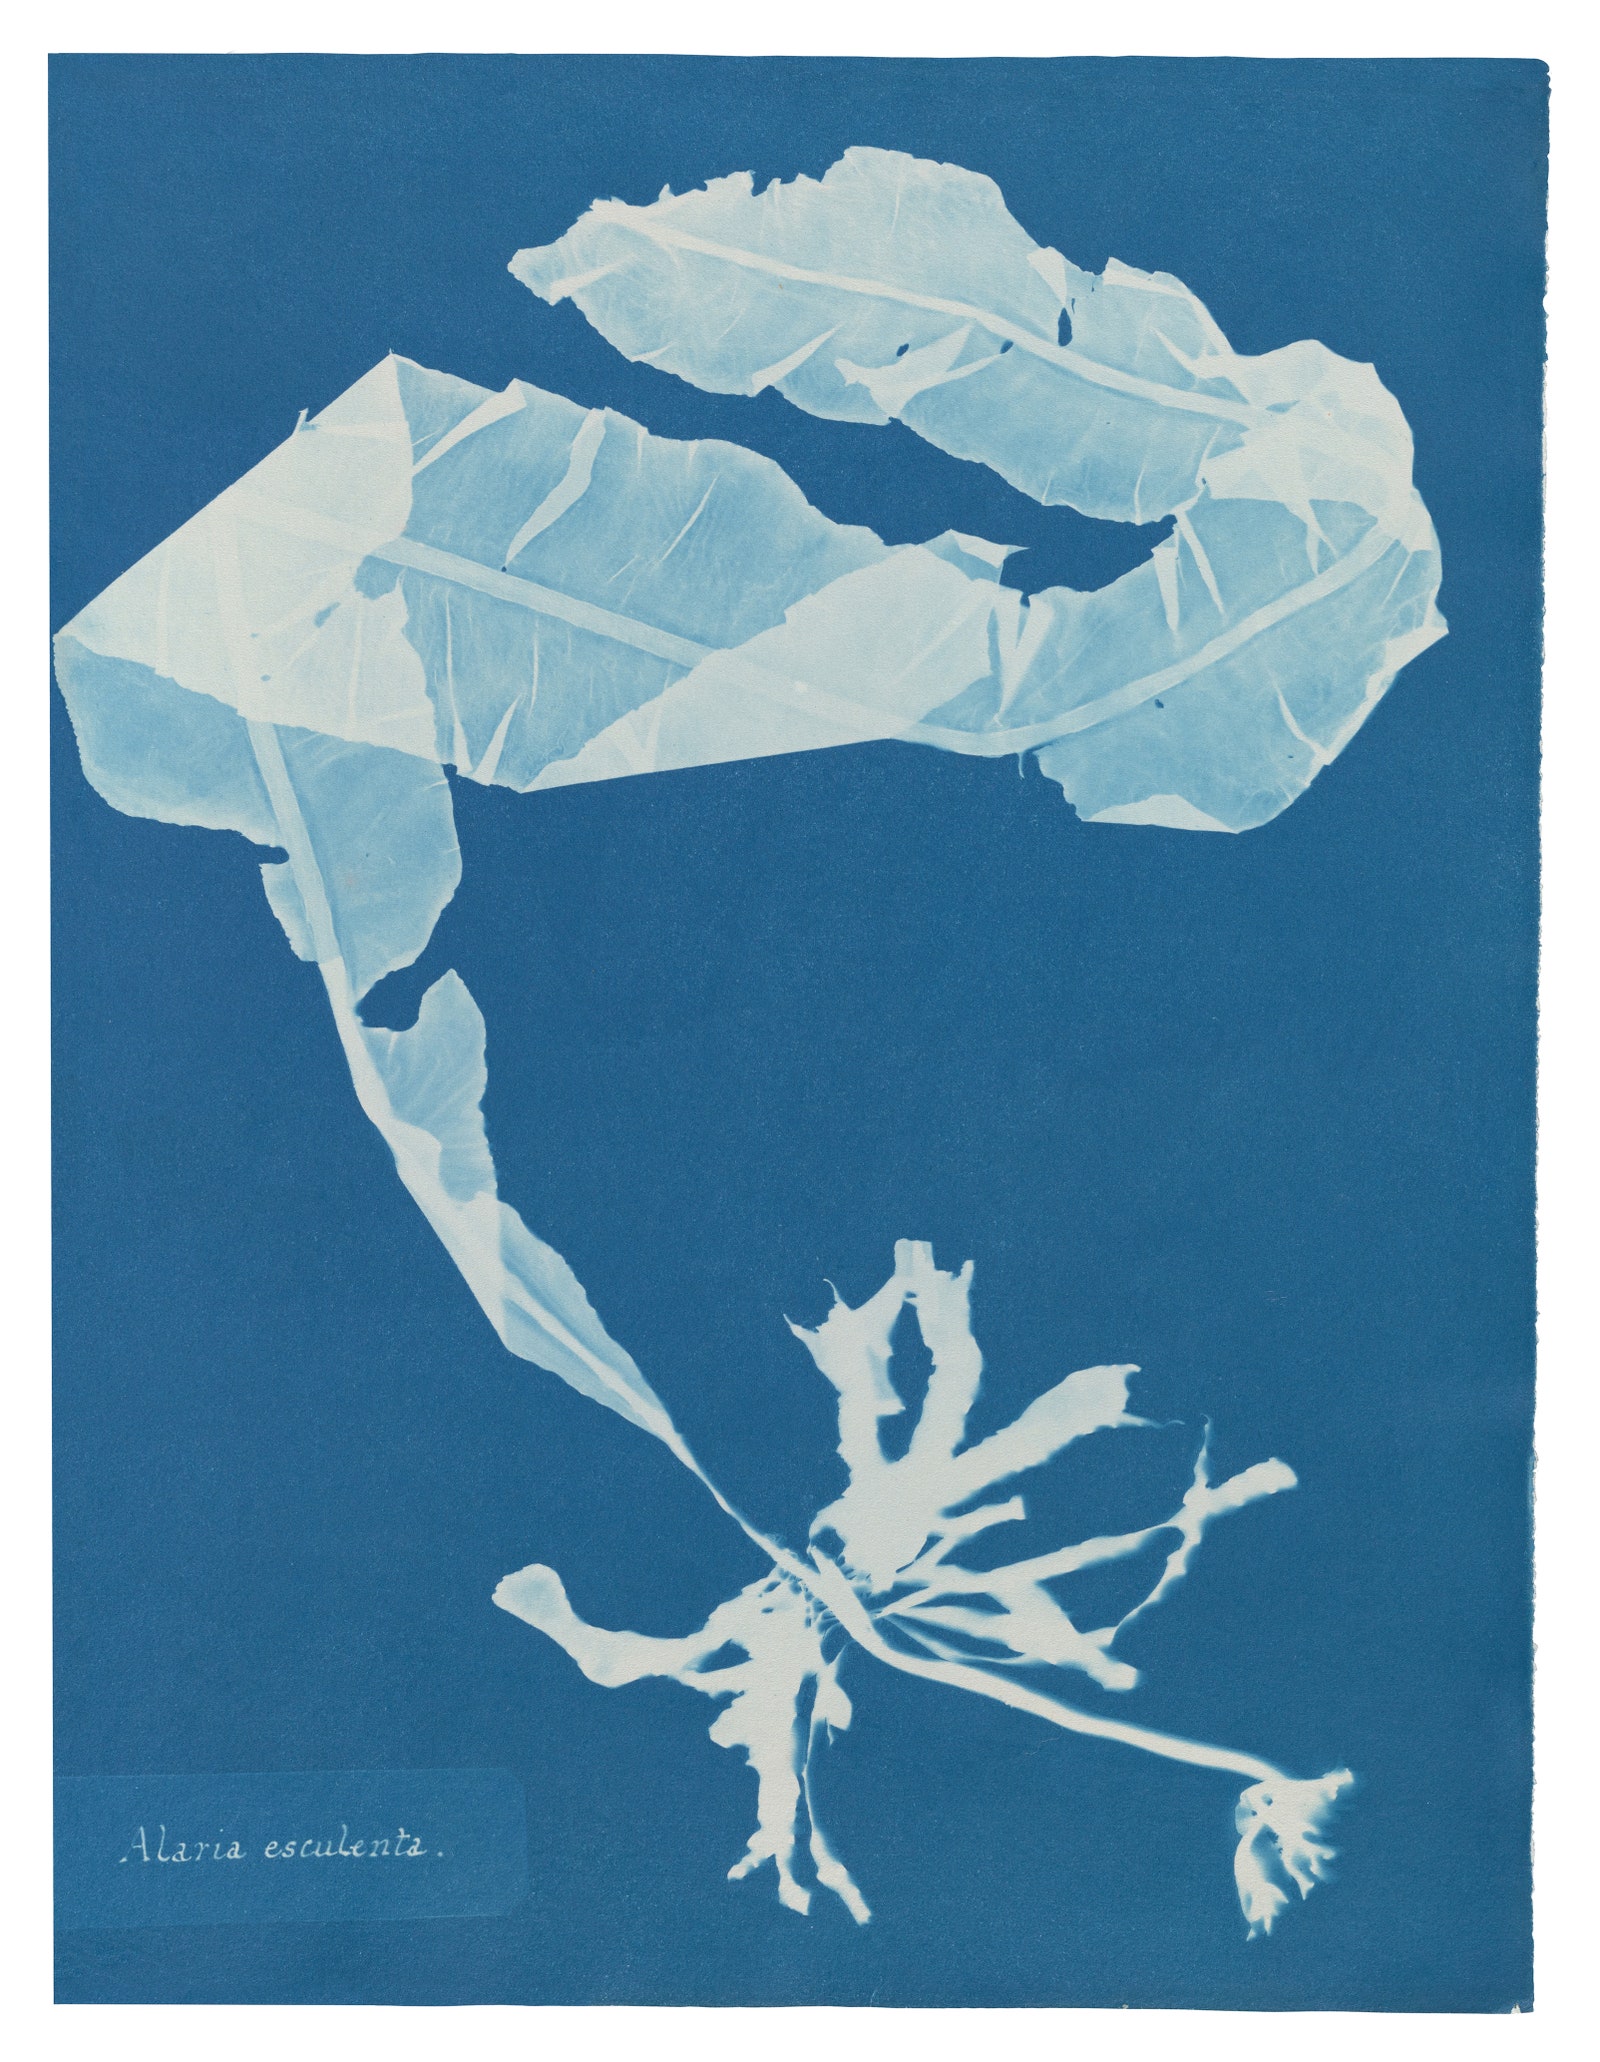 Anna Atkins’ book captures the delicacy of algae and ferns